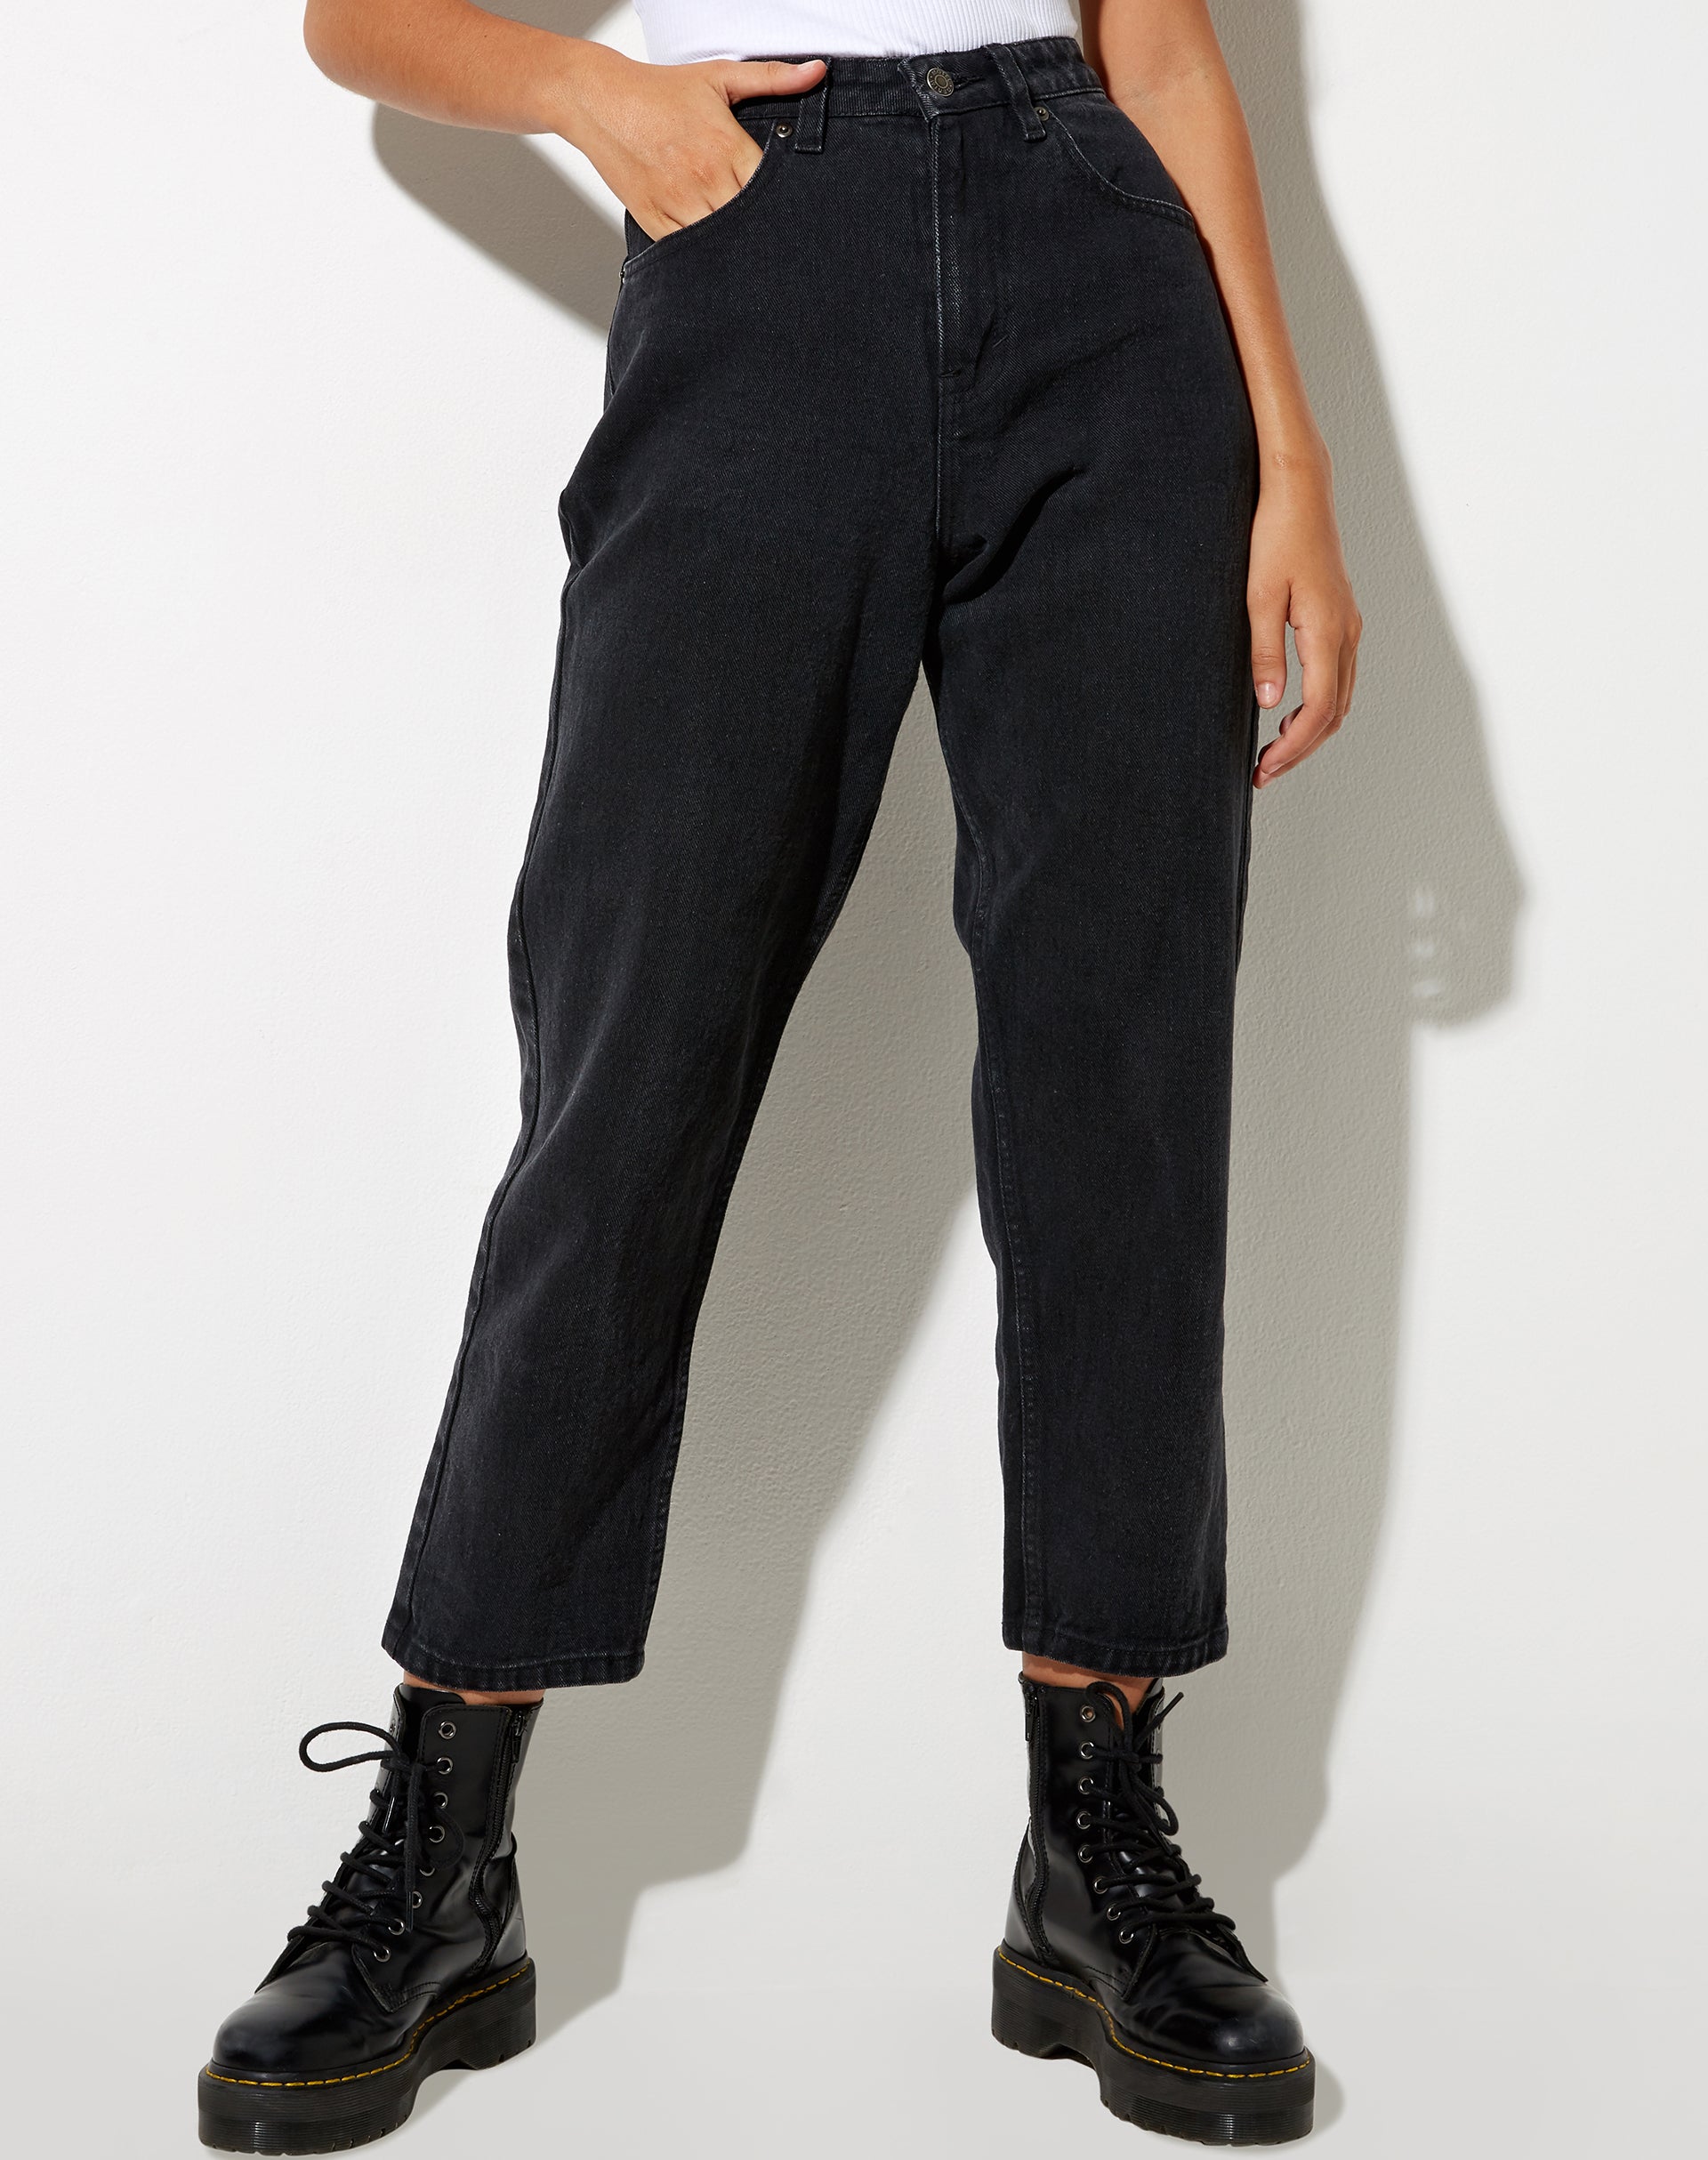 Image of Mom Jeans in Black Wash